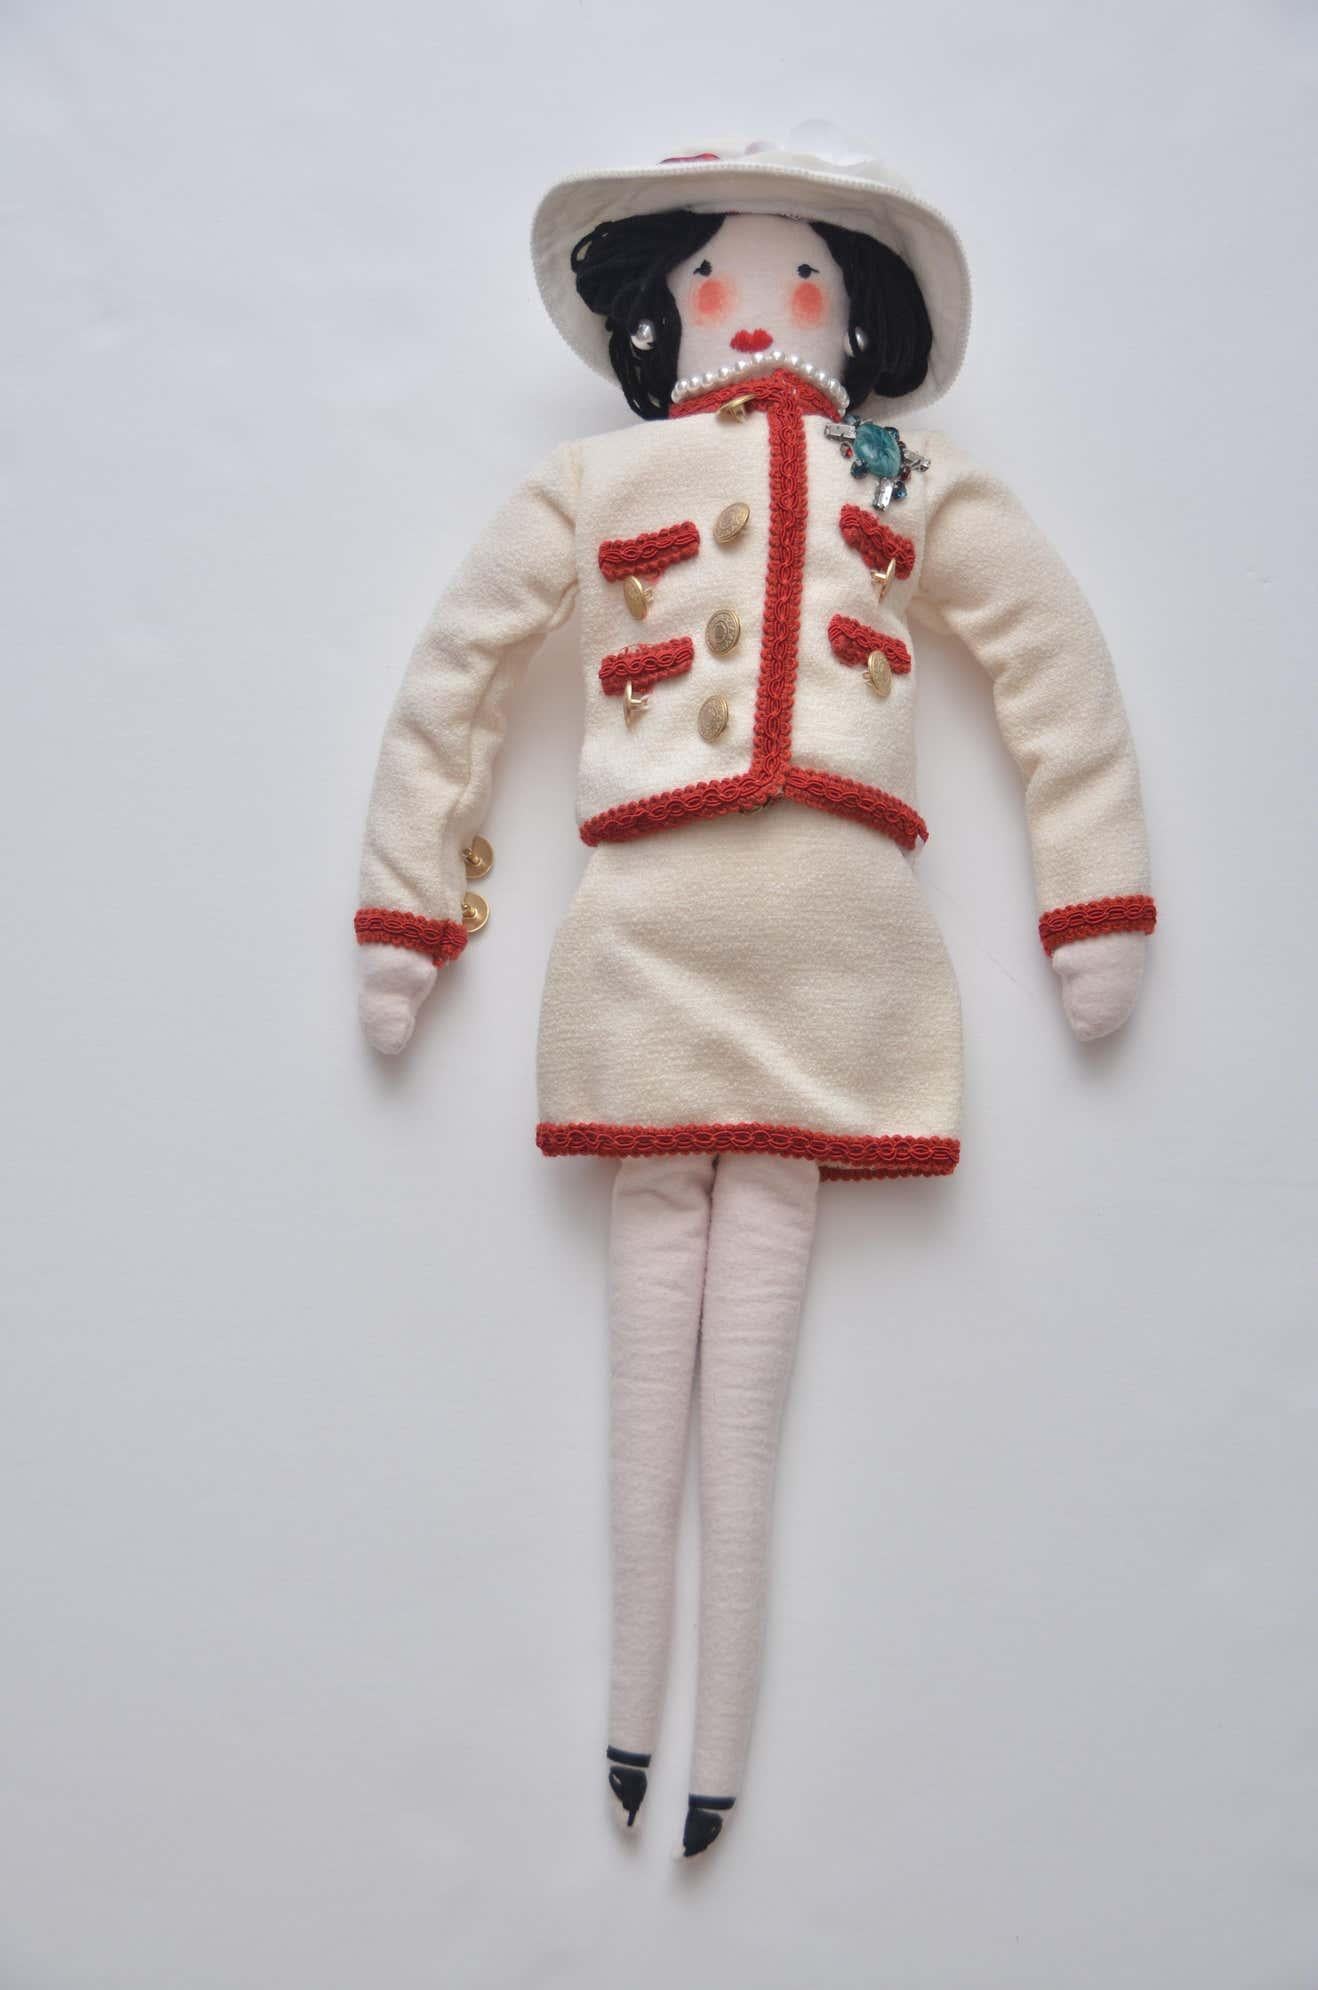 100% Authentic guaranteed 3 Chanel dolls designed by Karl Lagerfeld in 2010. Each doll has slightly different face because they where all handmade in France.  Chanel Mademoiselle doll was designed by Karl Lagerfeld For Chanel windows and given as